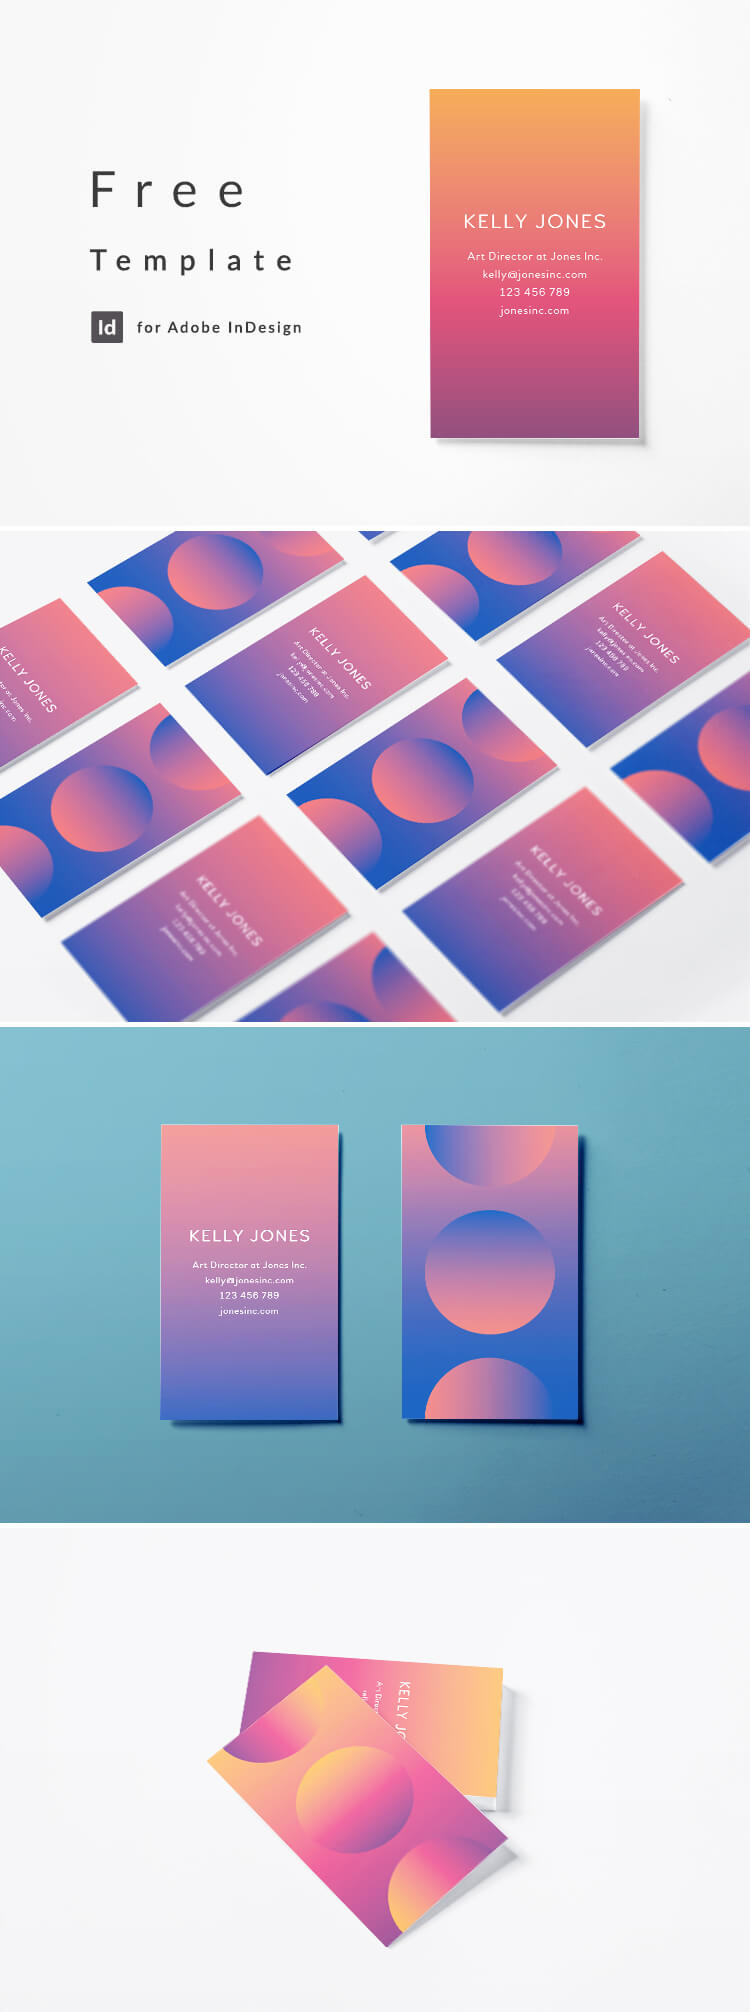 Free InDesign Business card template - 2 color options, modern creative layout. Free download for InDesign. Pink to blue gradient.